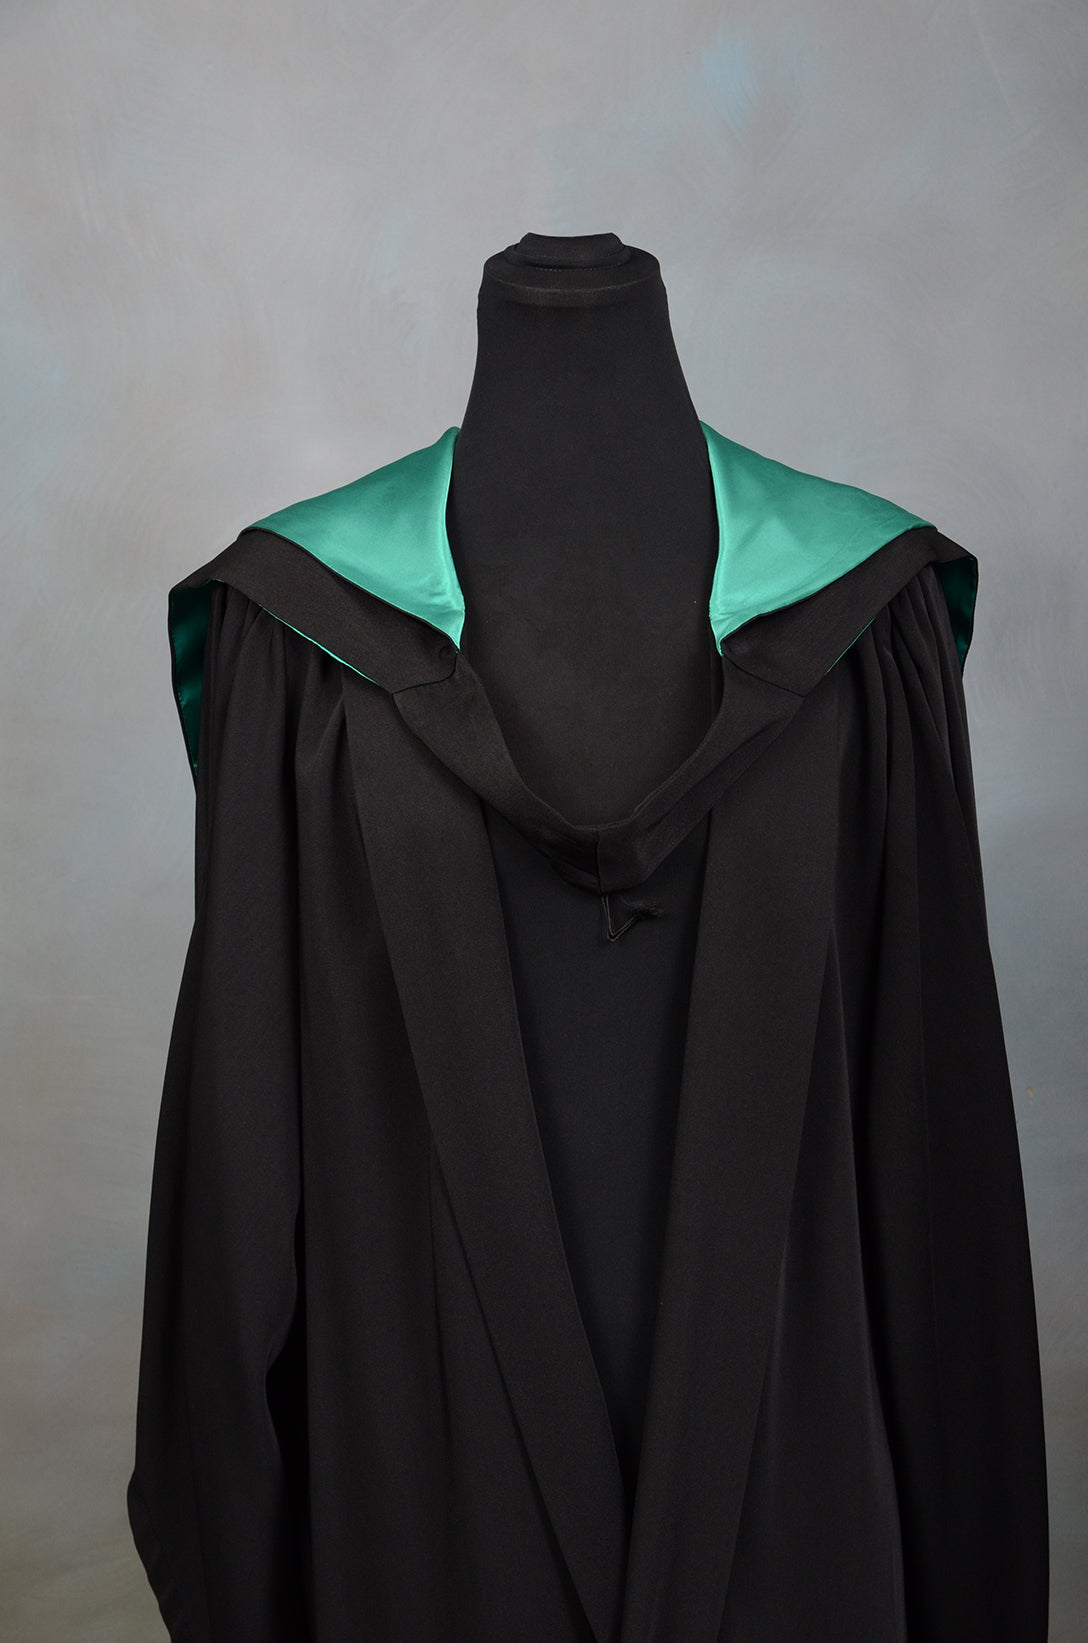 Bachelor's Embroidered Gown & Cap